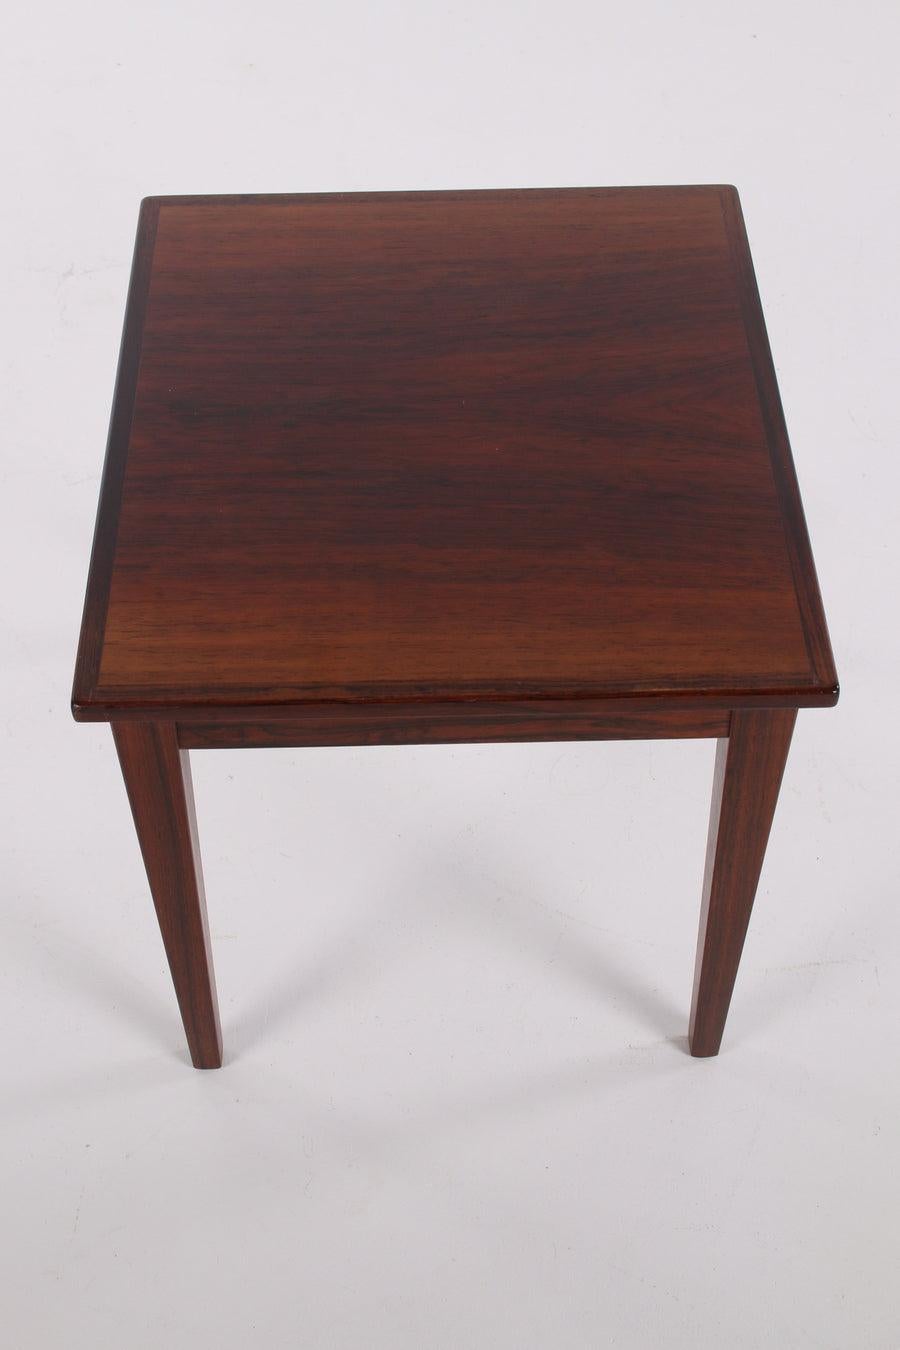 Blackwood Plant Table or Side Table, 1960s

This is a beautiful plant table made in Denmark in the 1960s.

Nice as a coffee table or side table when visitors come.

The legs can be detached if we send it in a small package.

Additional information: